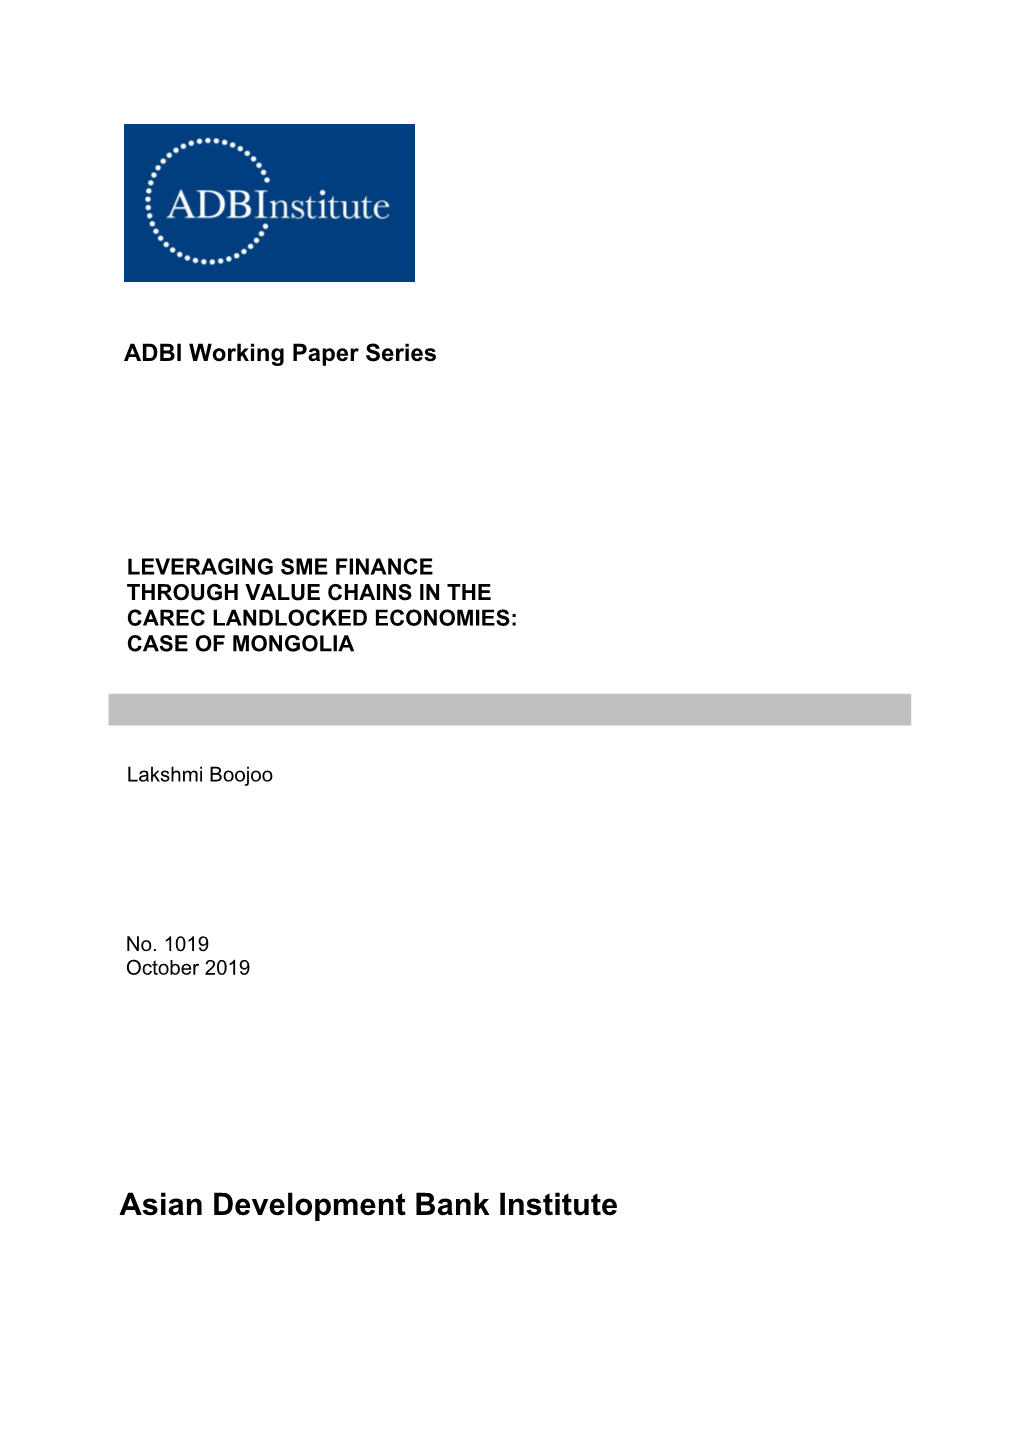 Leveraging SME Finance Through Value Chains in the CAREC Landlocked Economies: Case of Mongolia